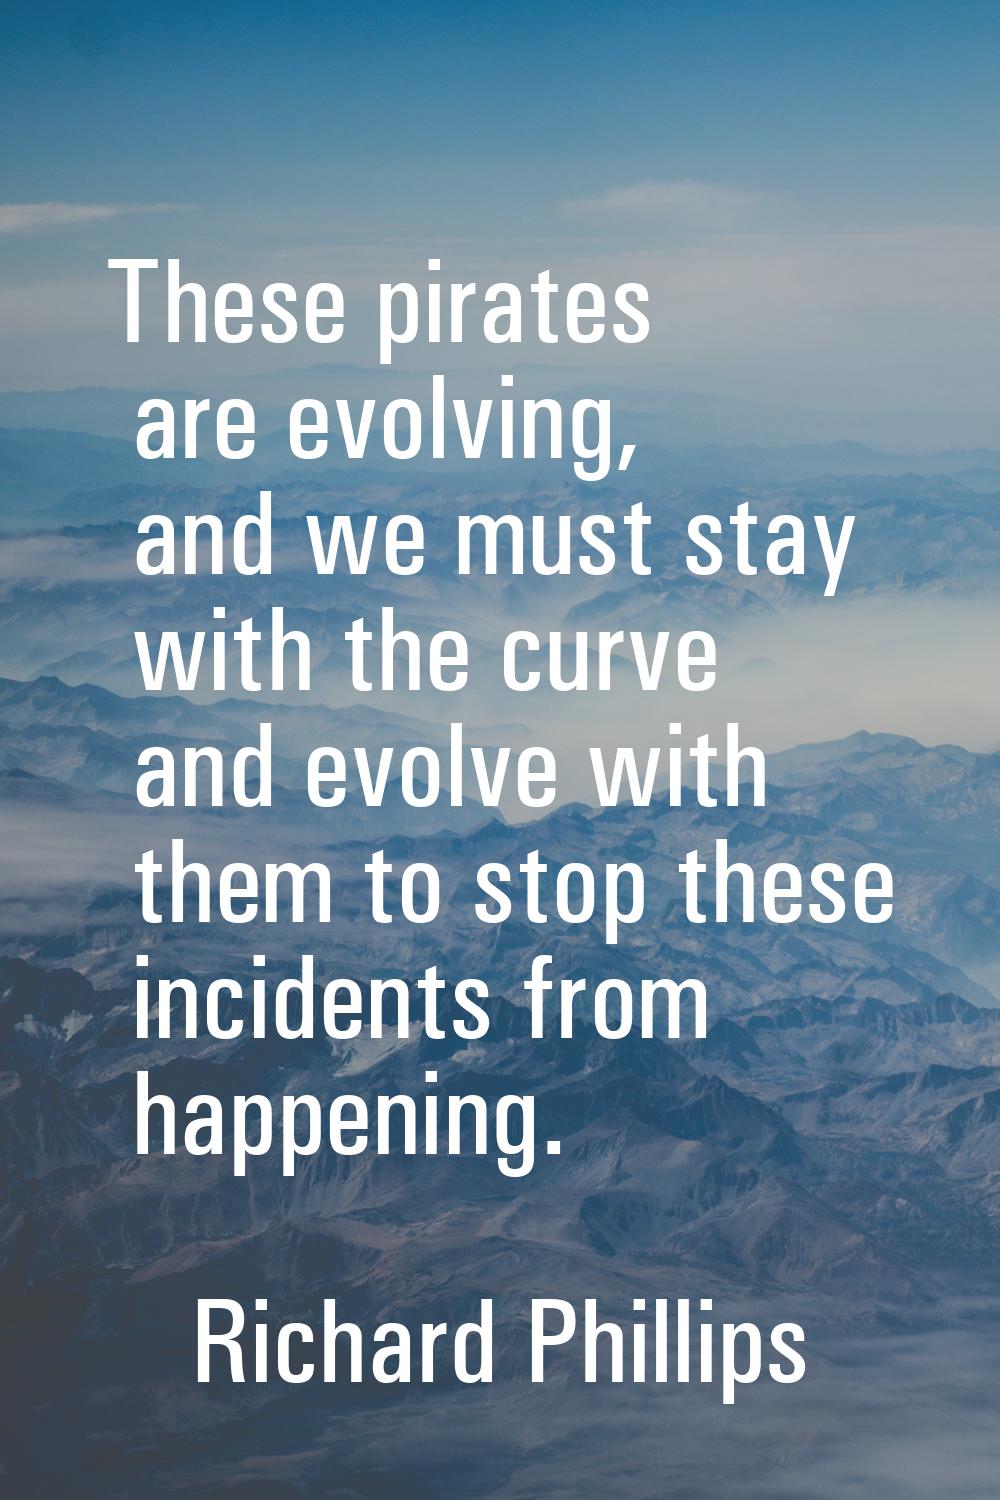 These pirates are evolving, and we must stay with the curve and evolve with them to stop these inci